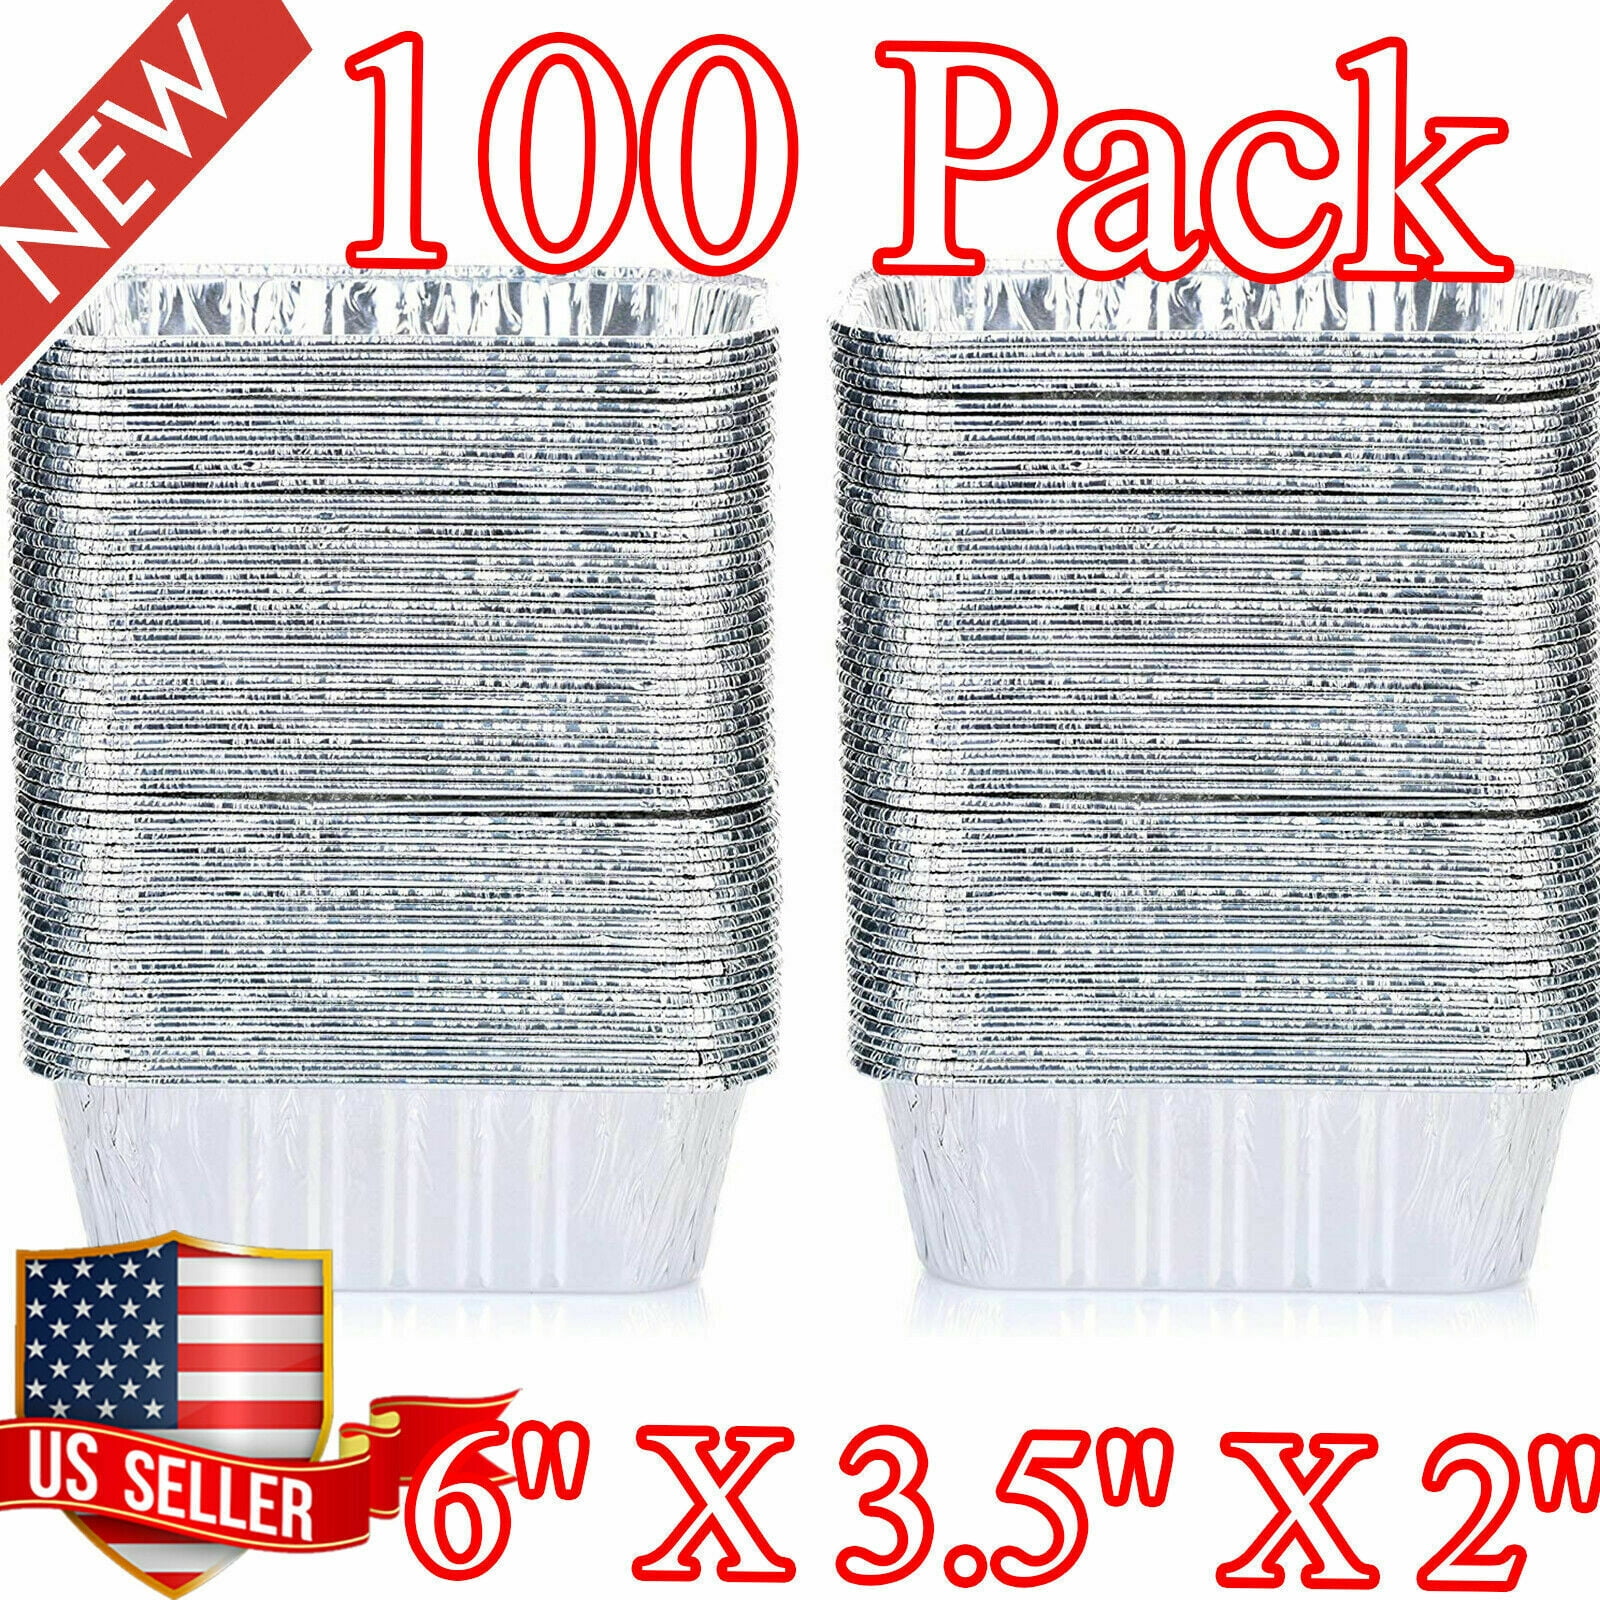 Waytiffer 50 Pack 1Lb mini Loaf Pans Heavy Duty Disposable Aluminum Foil  Bread Tins Standard Size - 6 X 3.5 X 2.5 Oven Safe Sturdy Small Bread  Tin